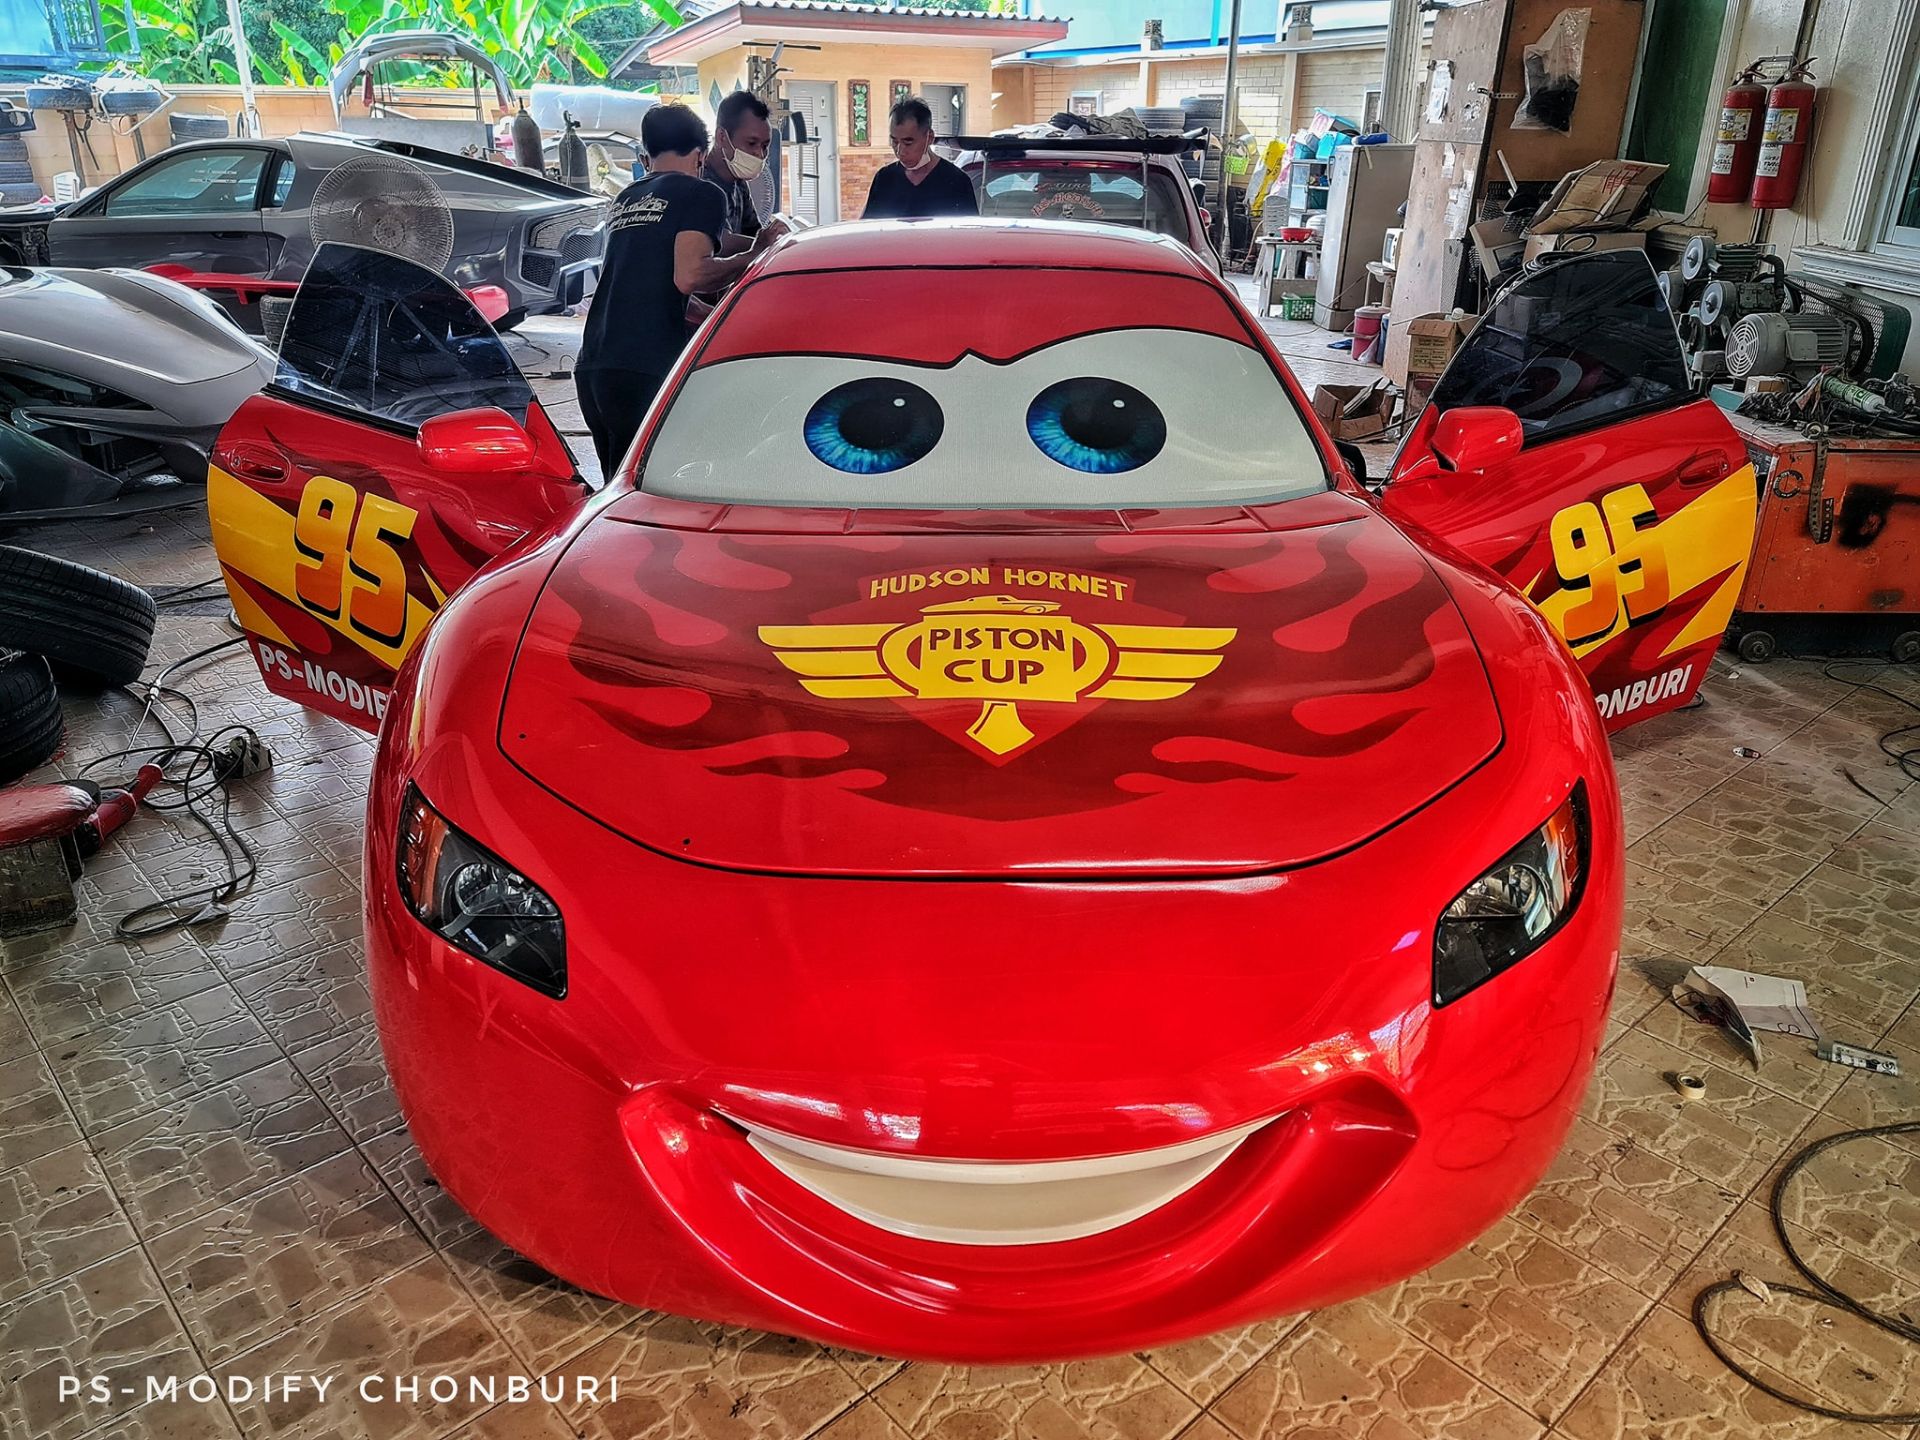 Thai Shop Builds Real-Life Replicas Of Lightning McQueen Based On